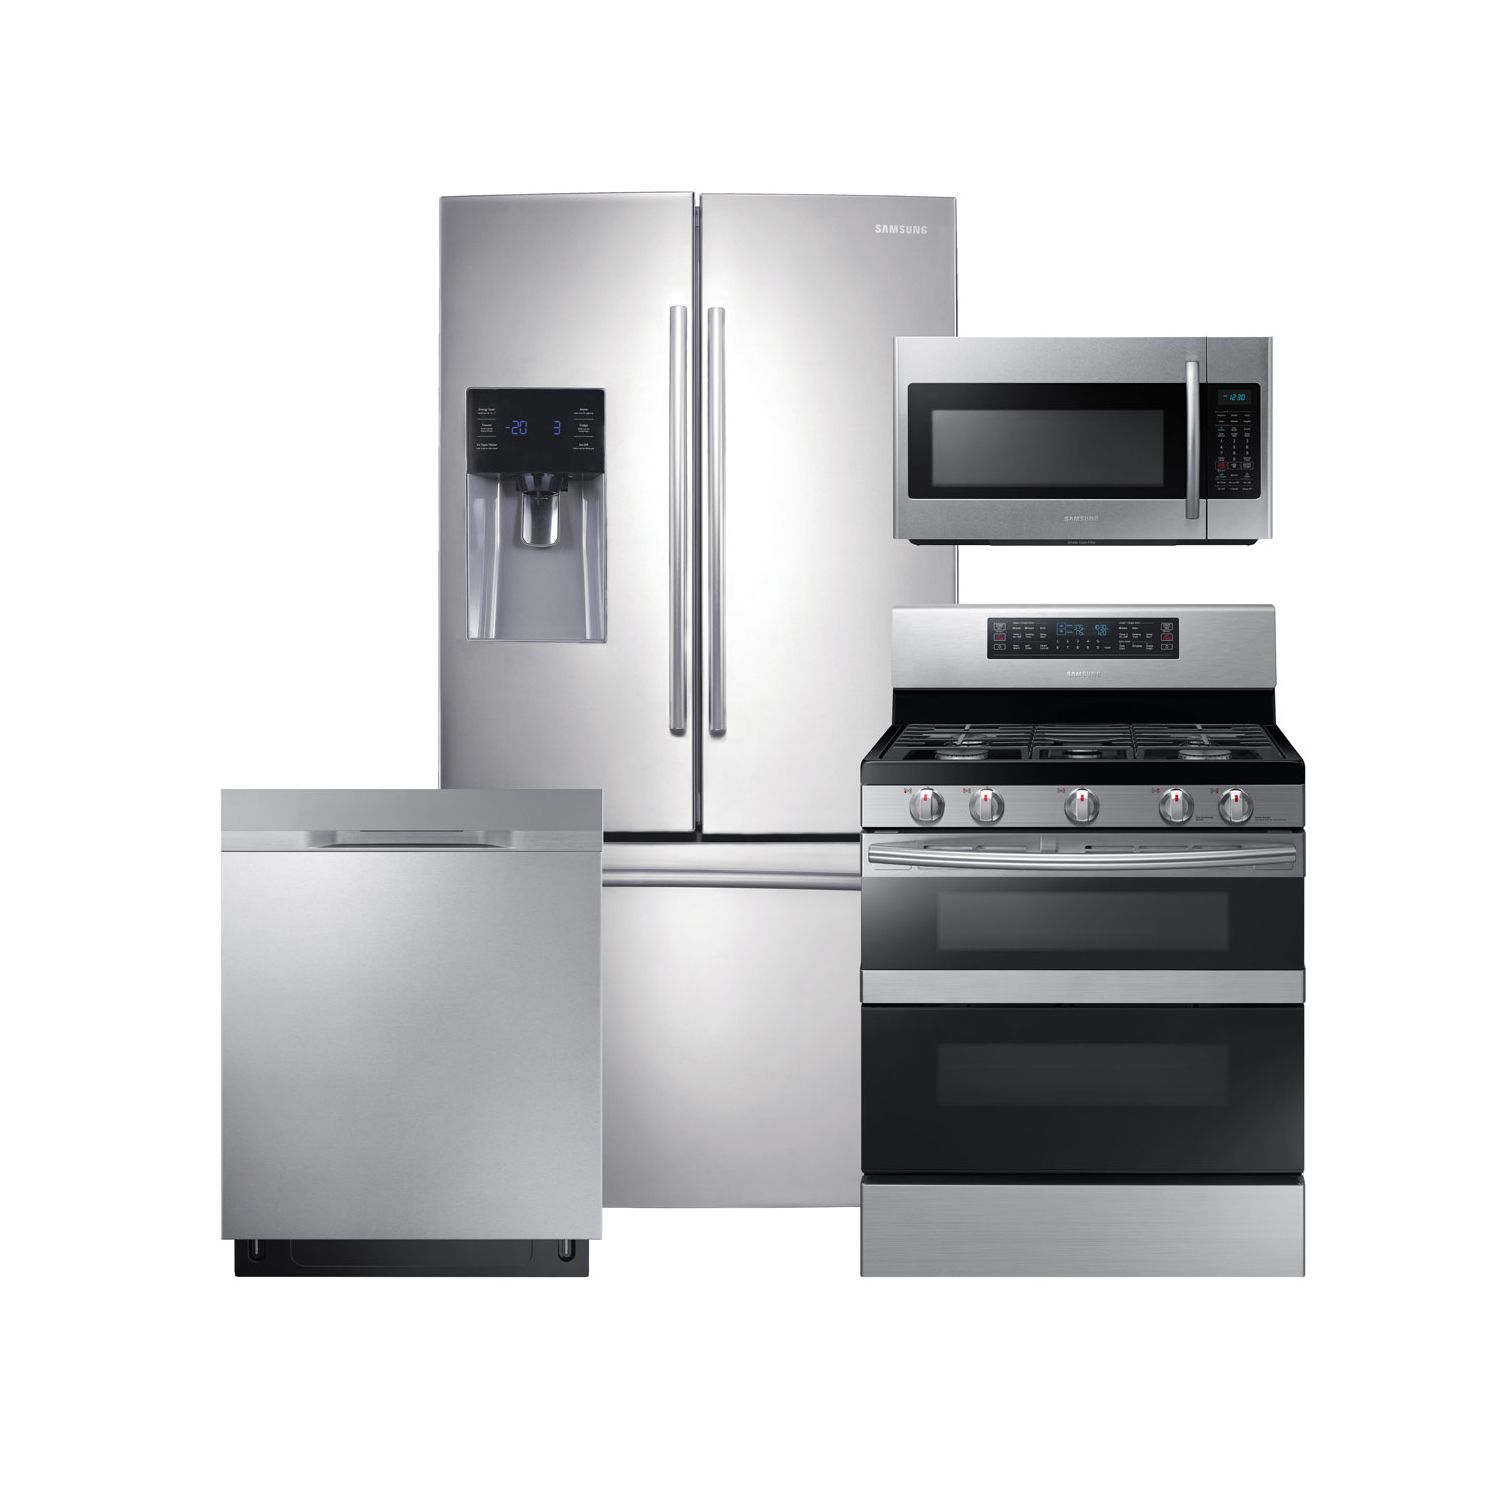 Samsung 3-Door Refrigerator, Flex Duo Gas Range, Microwave, and Dishwasher Package in Stainless Steel Finish